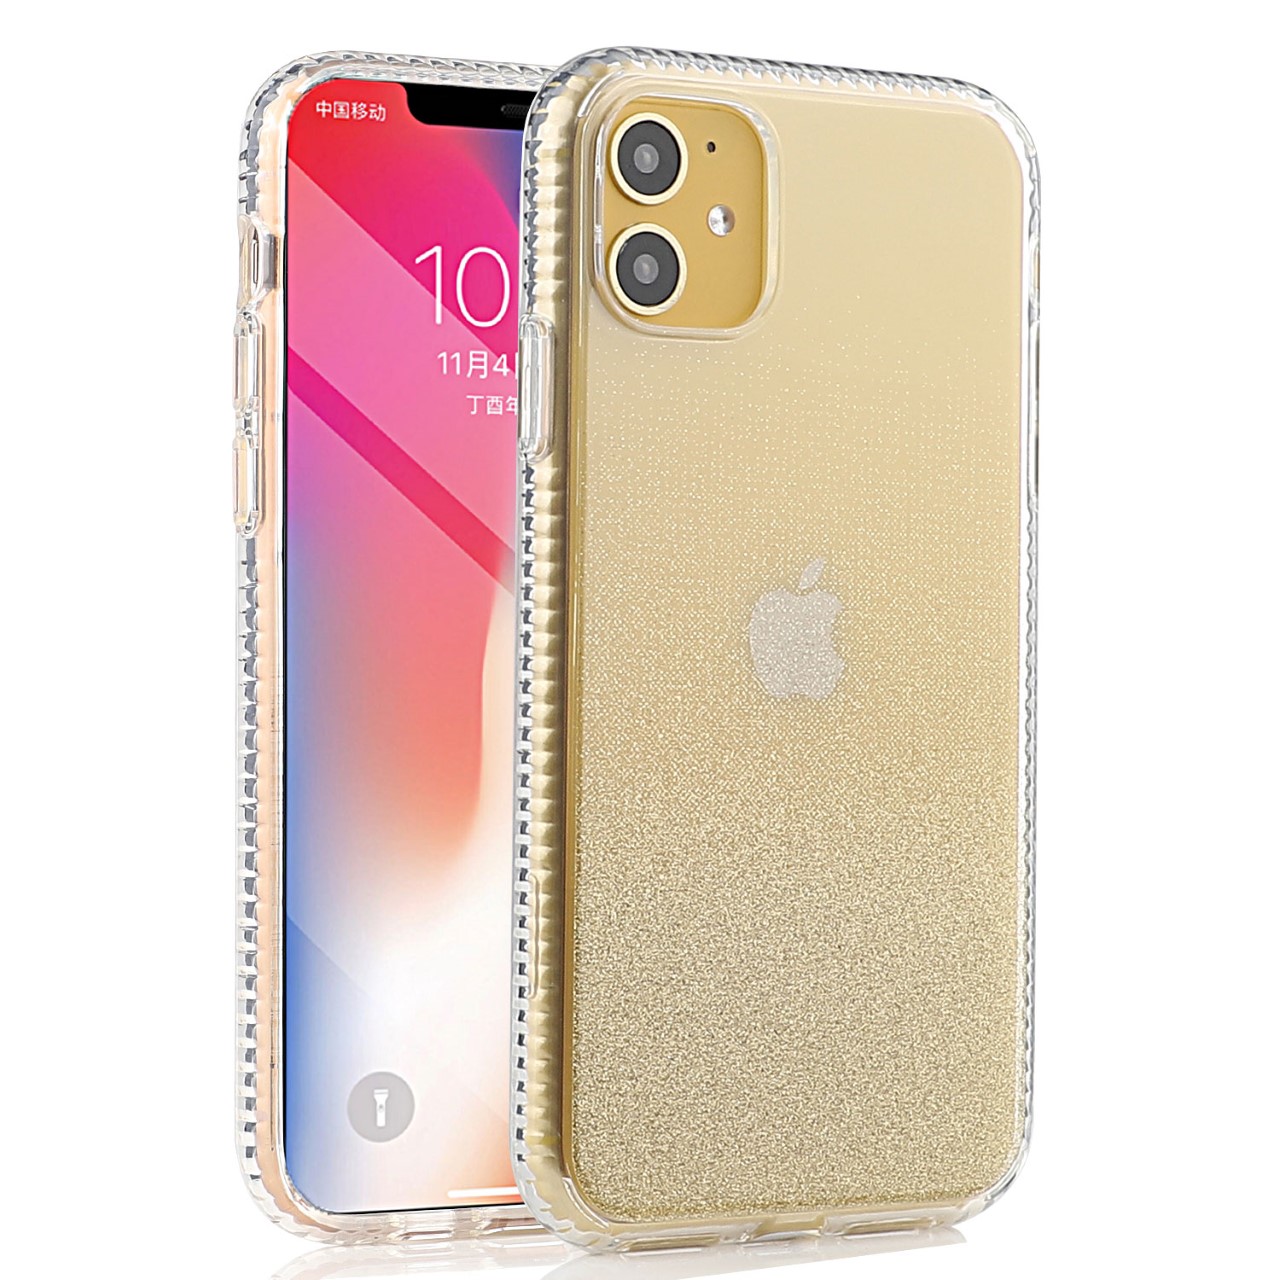 iPhone 11 New luxury two tone charming color phone case - Clear/Yellow (4889)